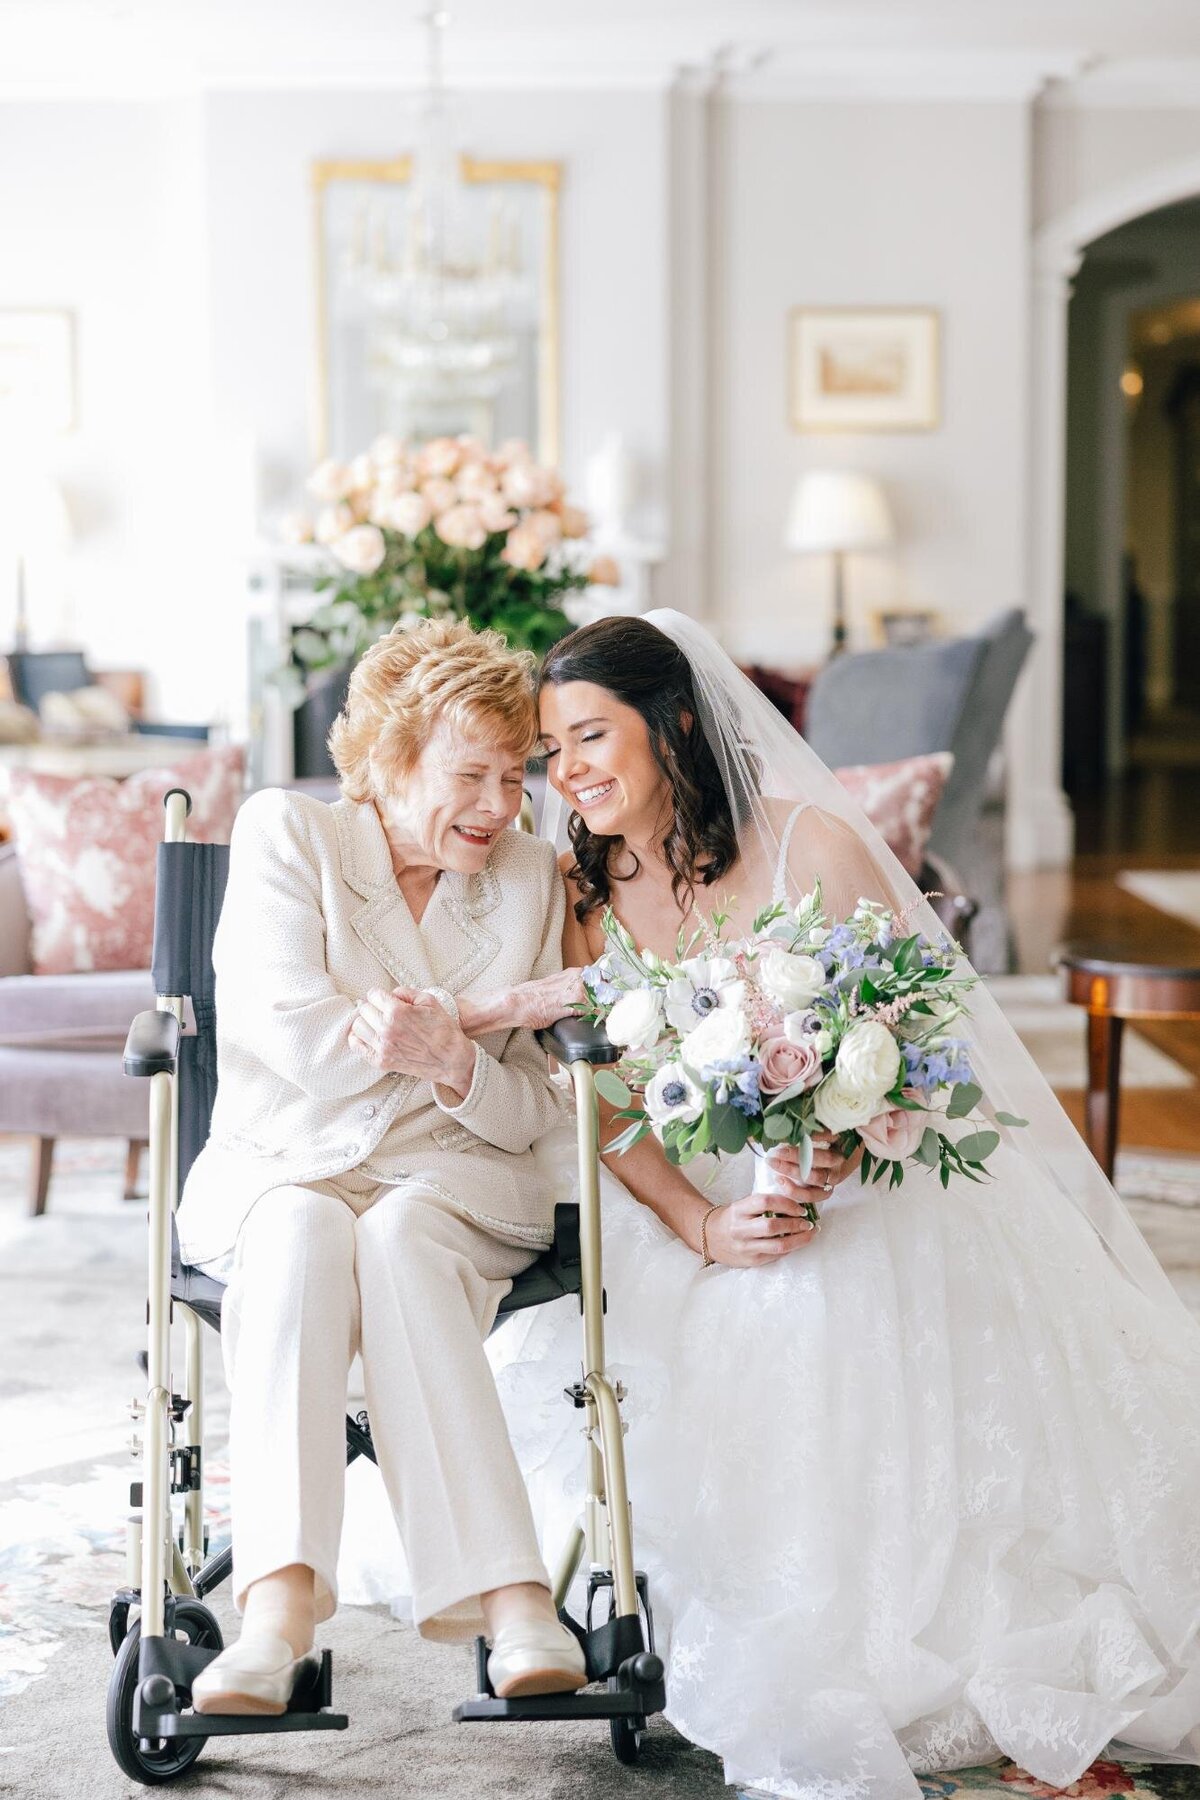 Bride in white dress sharing a tender moment with an elderly woman in a wheelchair, both smiling and holding hands at an indoor setting.